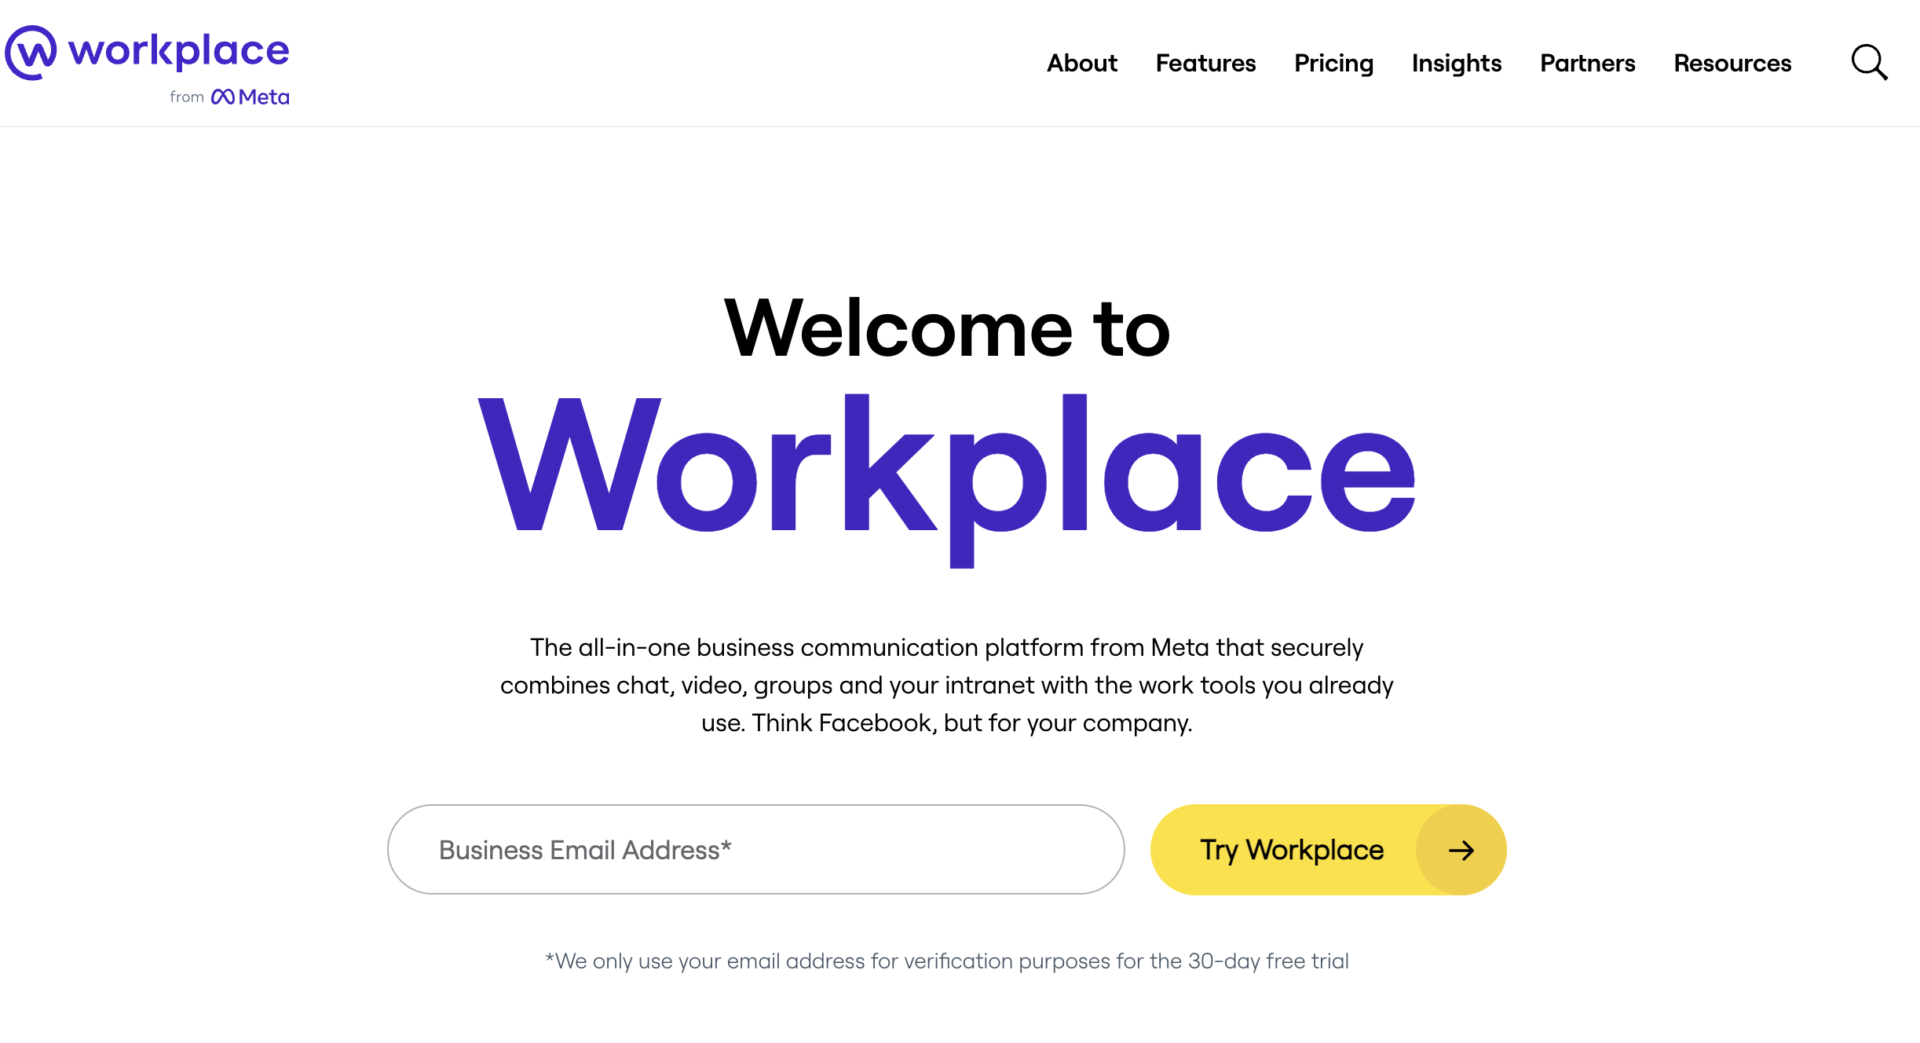 Top Page of Workplace by Meta